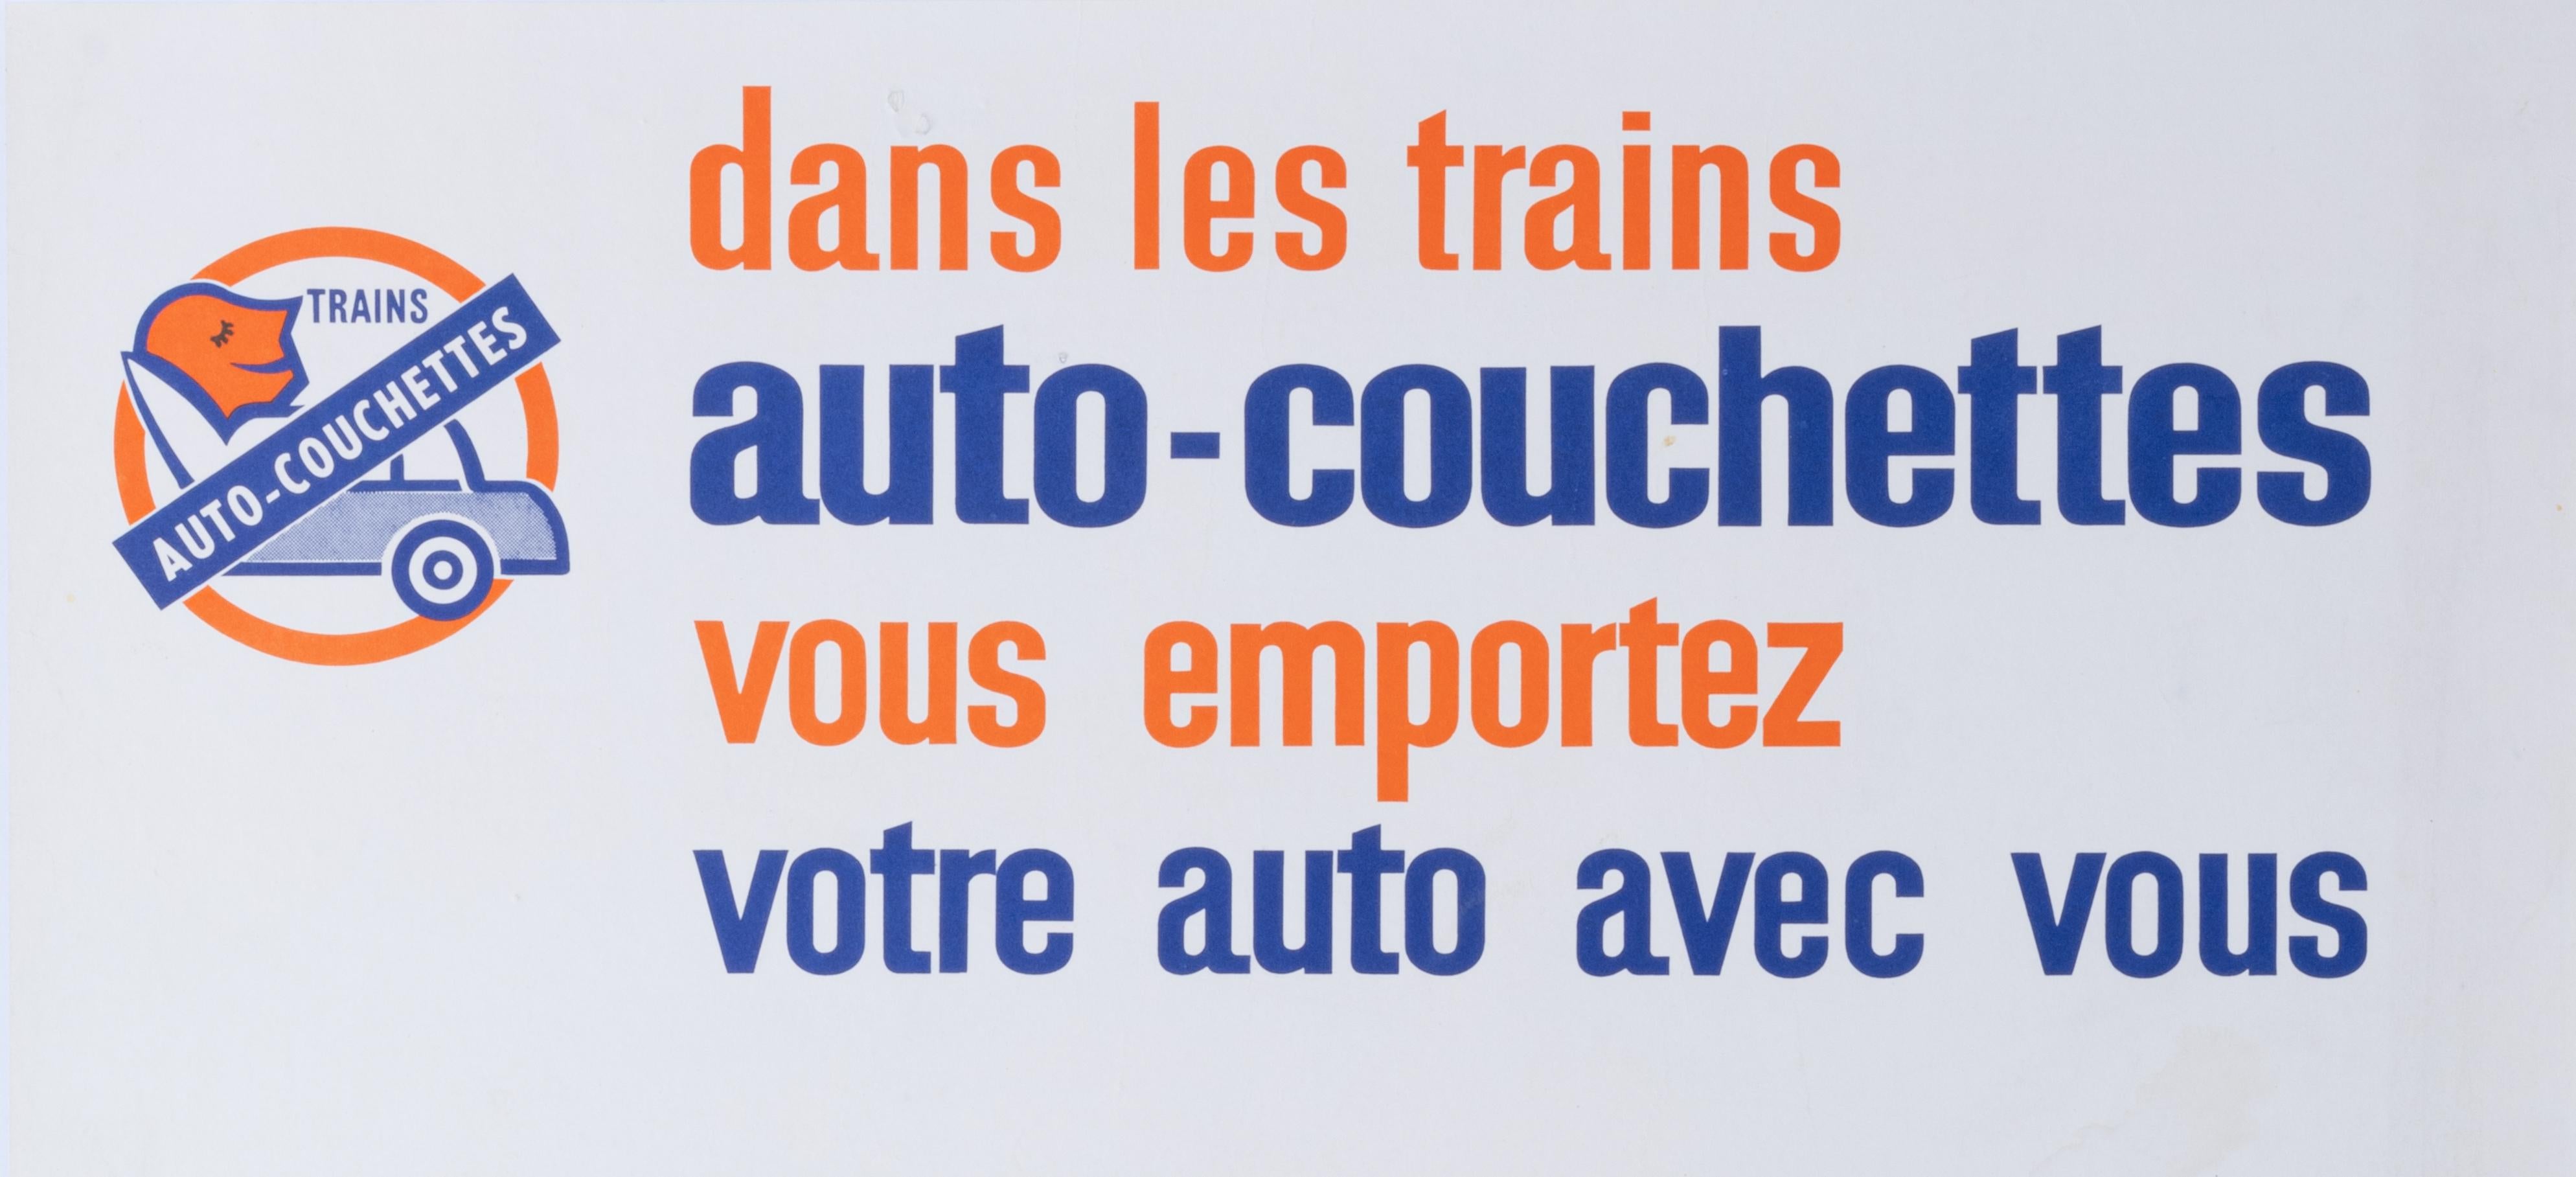 This poster from the Societe Nationale des Chemins de Fer Français (SNCF) was produced in 1963 by Albert Brenet to promote travel in sleeping wagons in France.

Artist : Albert Brenet (1903 - 2005)
Title : Dans les trains auto-couchettes vous